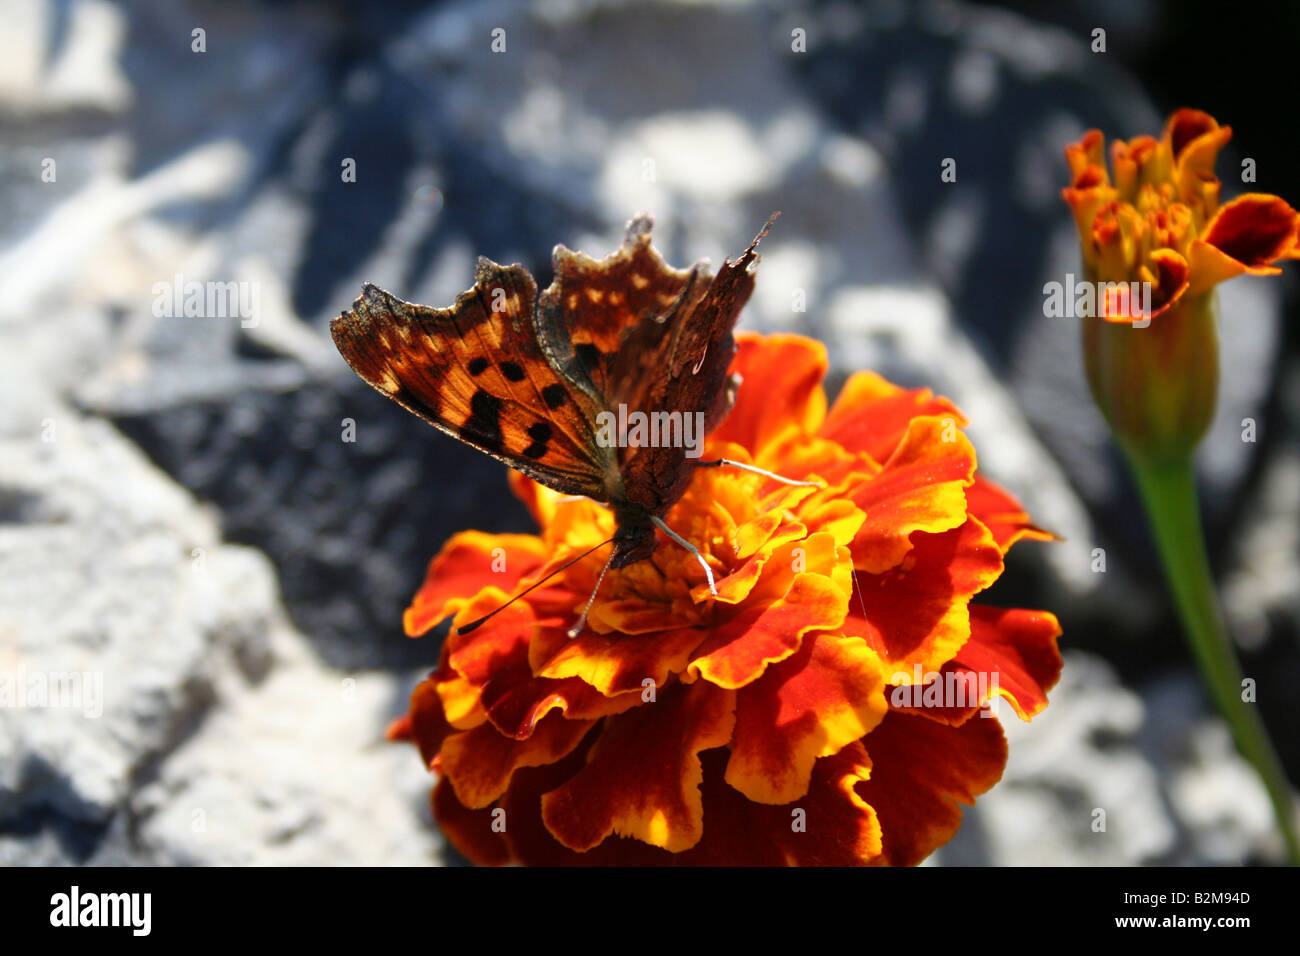 butterfly over targetes flower Stock Photo